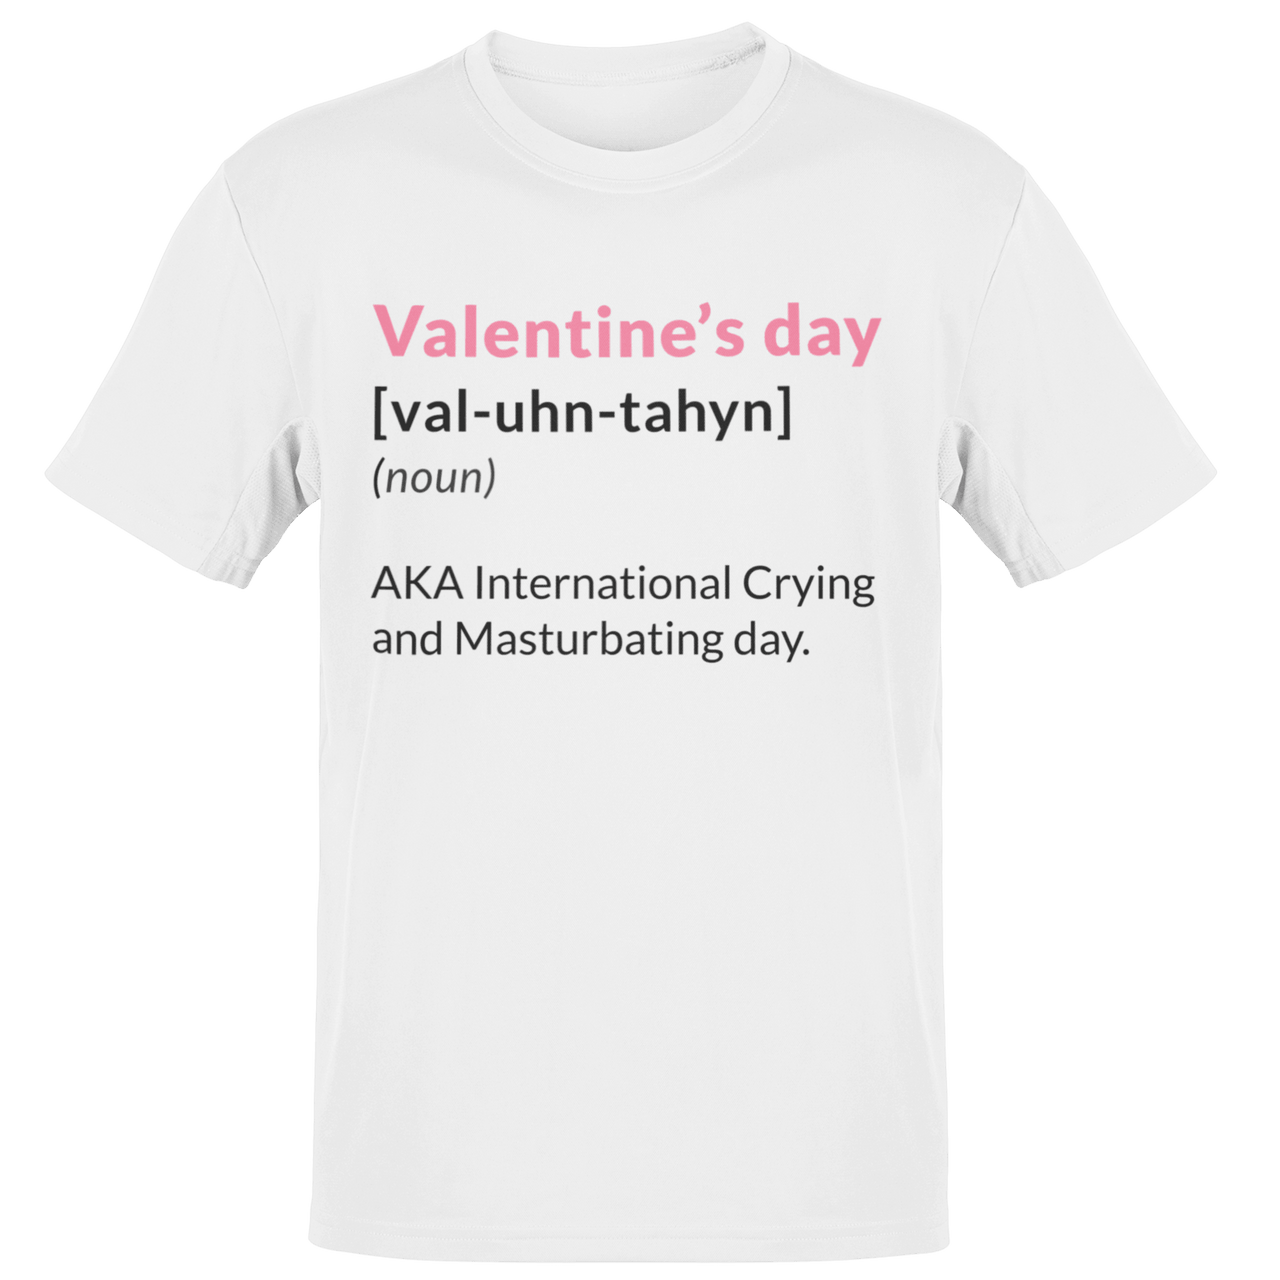 Valentine's Day Definition Also Known As Adult T-Shirt For Men 8Ball